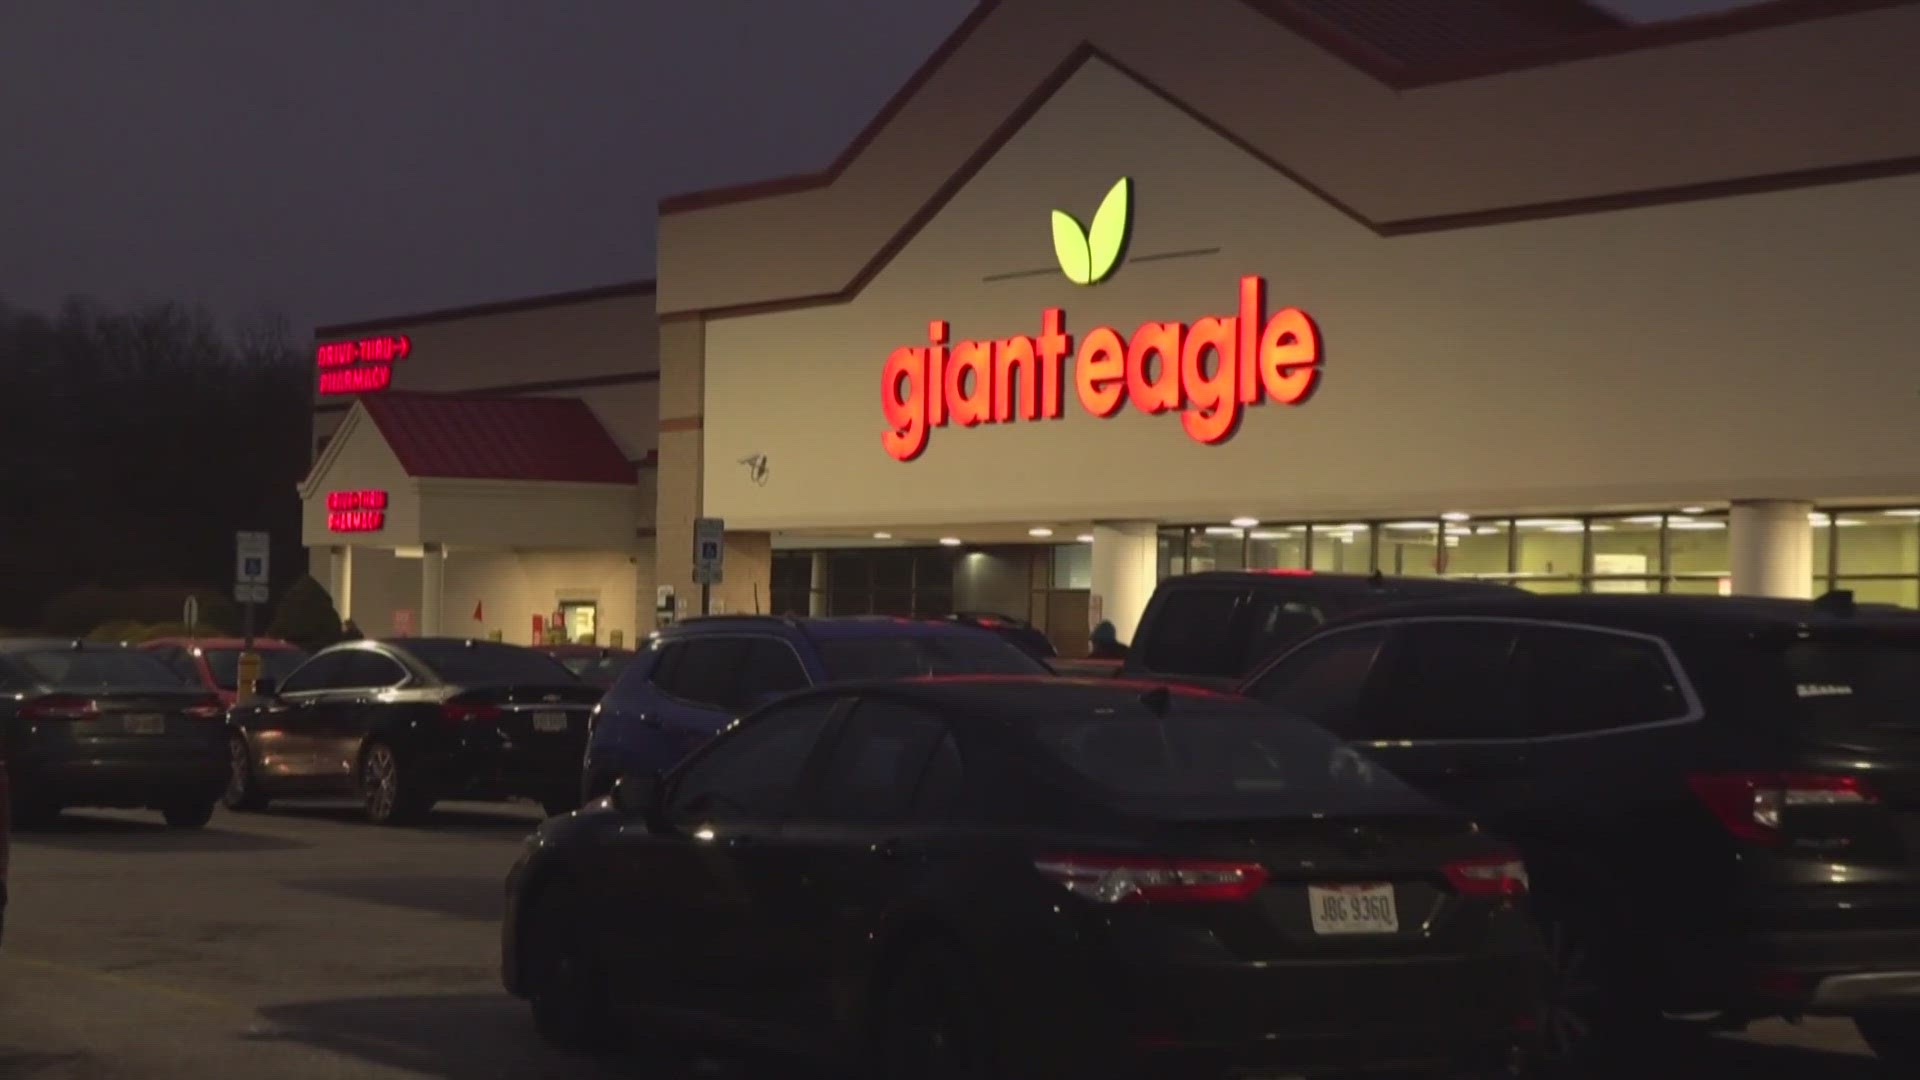 Giant Eagle has announced that skimmer devices used to gain access to customer credit and debit cards were found at five Ohio locations.